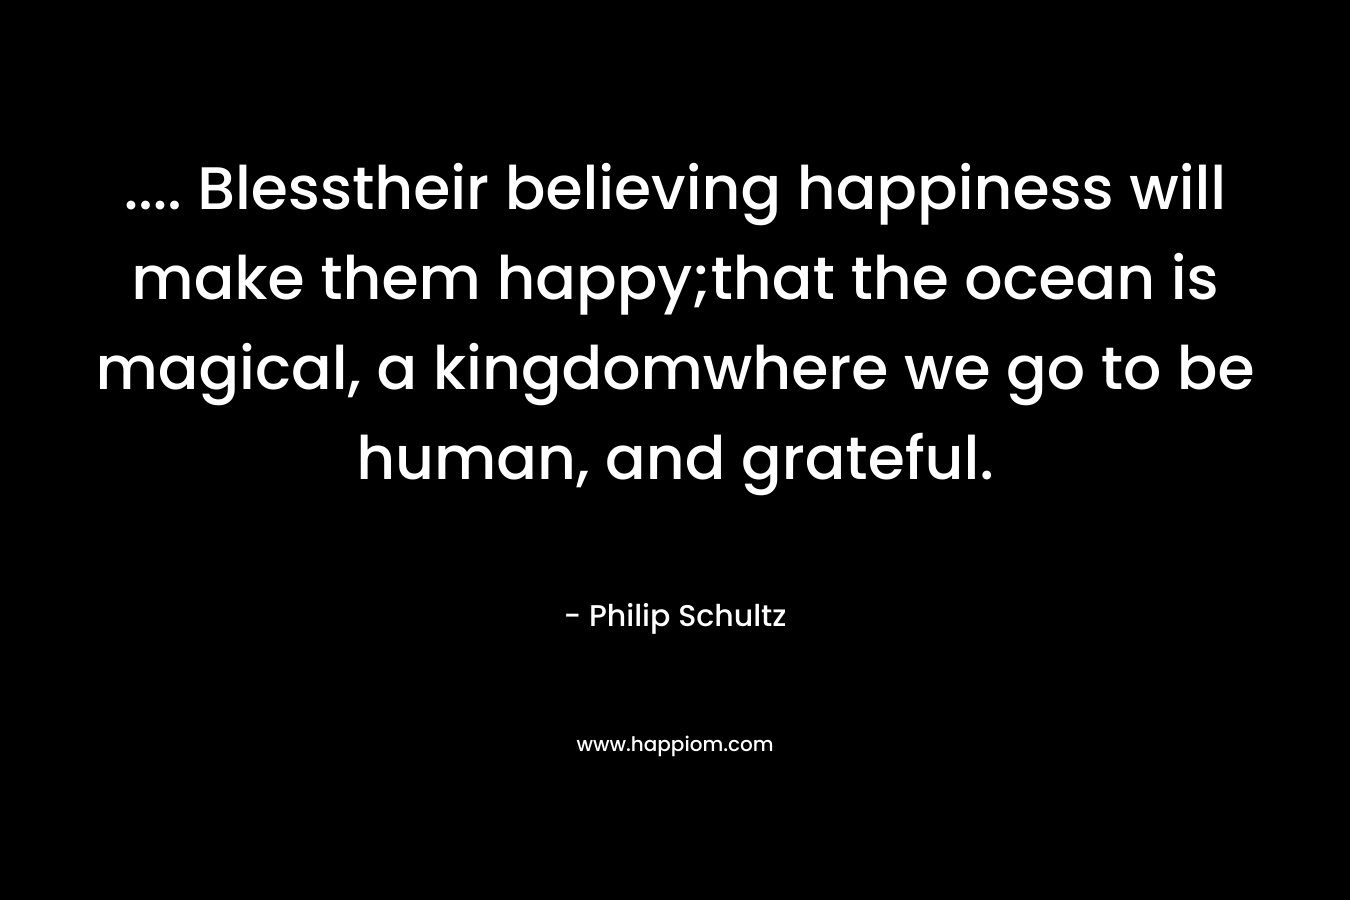 .... Blesstheir believing happiness will make them happy;that the ocean is magical, a kingdomwhere we go to be human, and grateful.